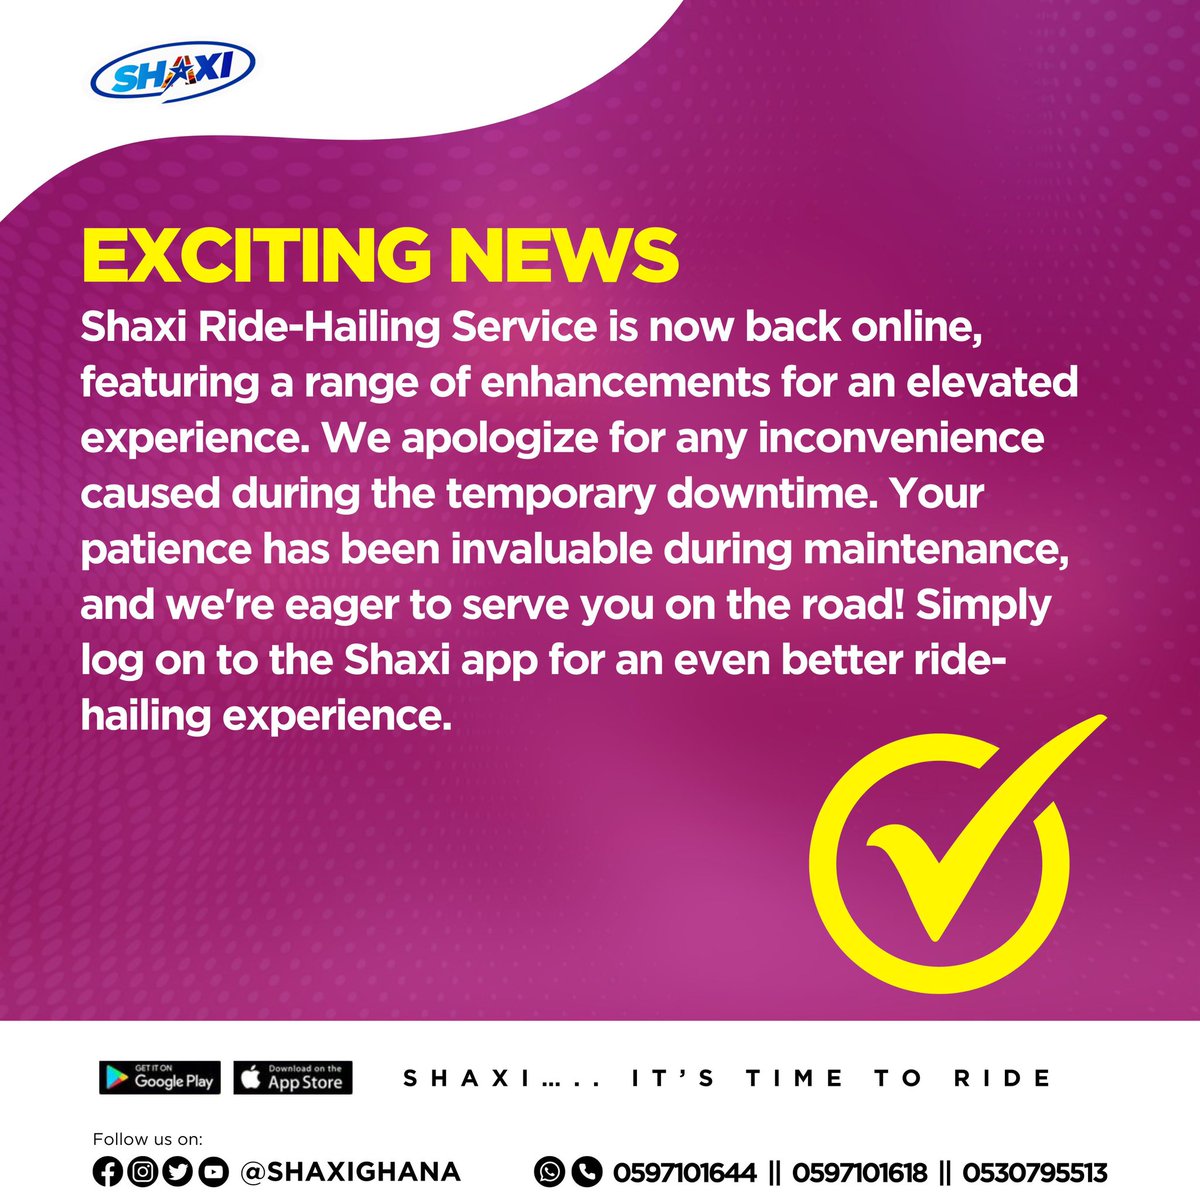 Exciting news! Shaxi Ride-Hailing Service is now back online, featuring a range of enhancements for an elevated experience. We apologize for any inconvenience caused during the temporary downtime. Your patience has been invaluable during maintenance. #shaxi #shaxighana